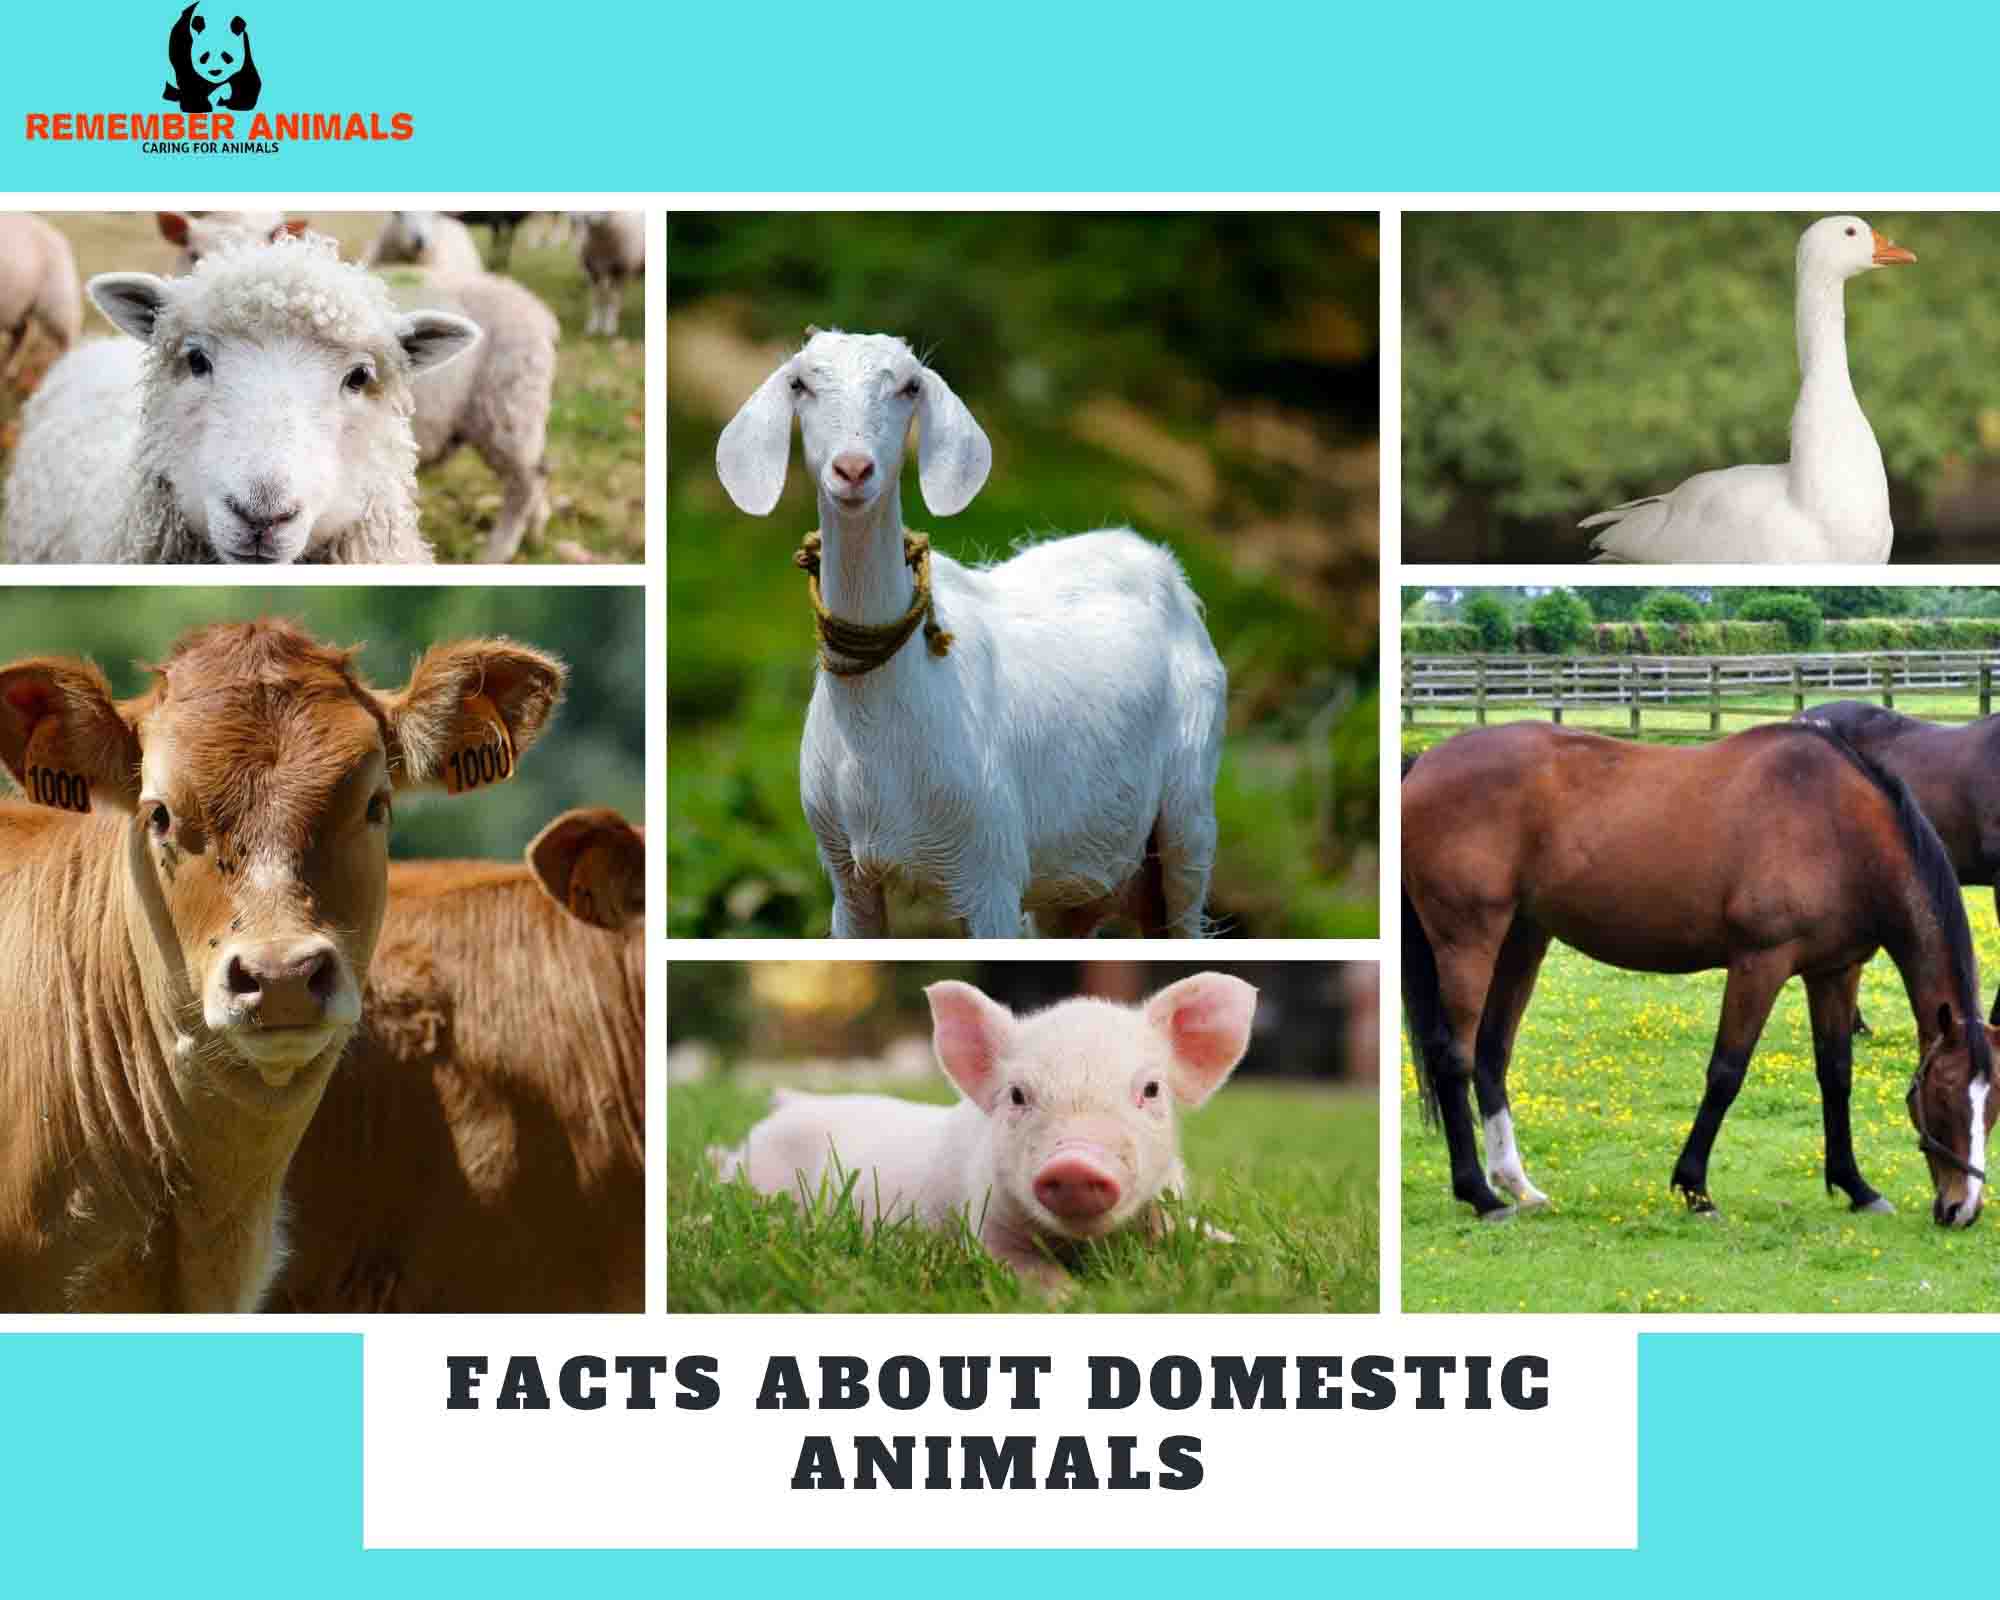 FACTS ABOUT DOMESTIC ANIMALS - Remember Animals